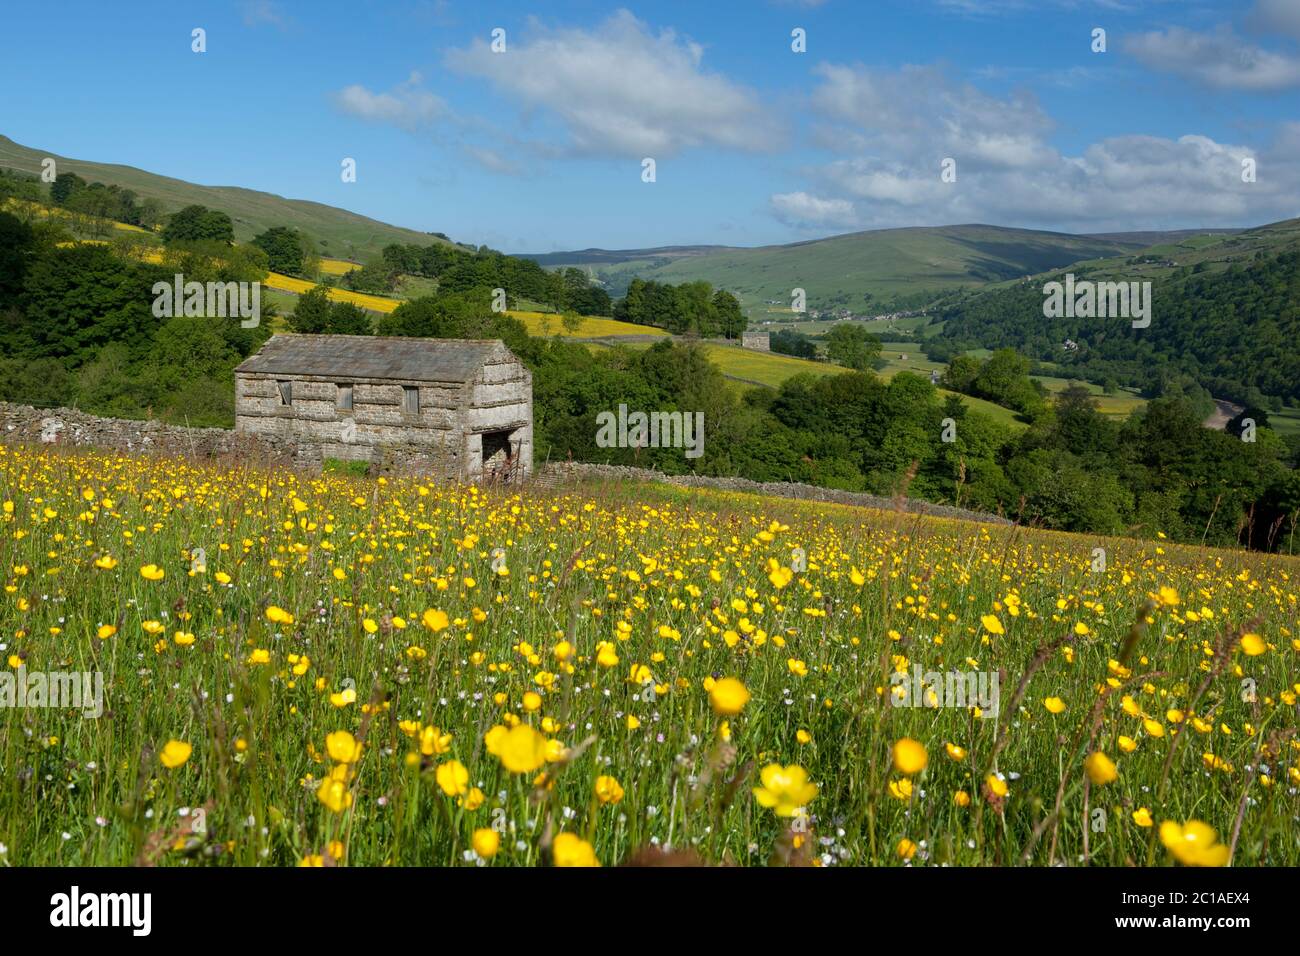 View over Buttercup meadow to valley of Swaledale, near Hawes, Yorkshire Dales National Park, North Yorkshire, England, United Kingdom, Europe Stock Photo